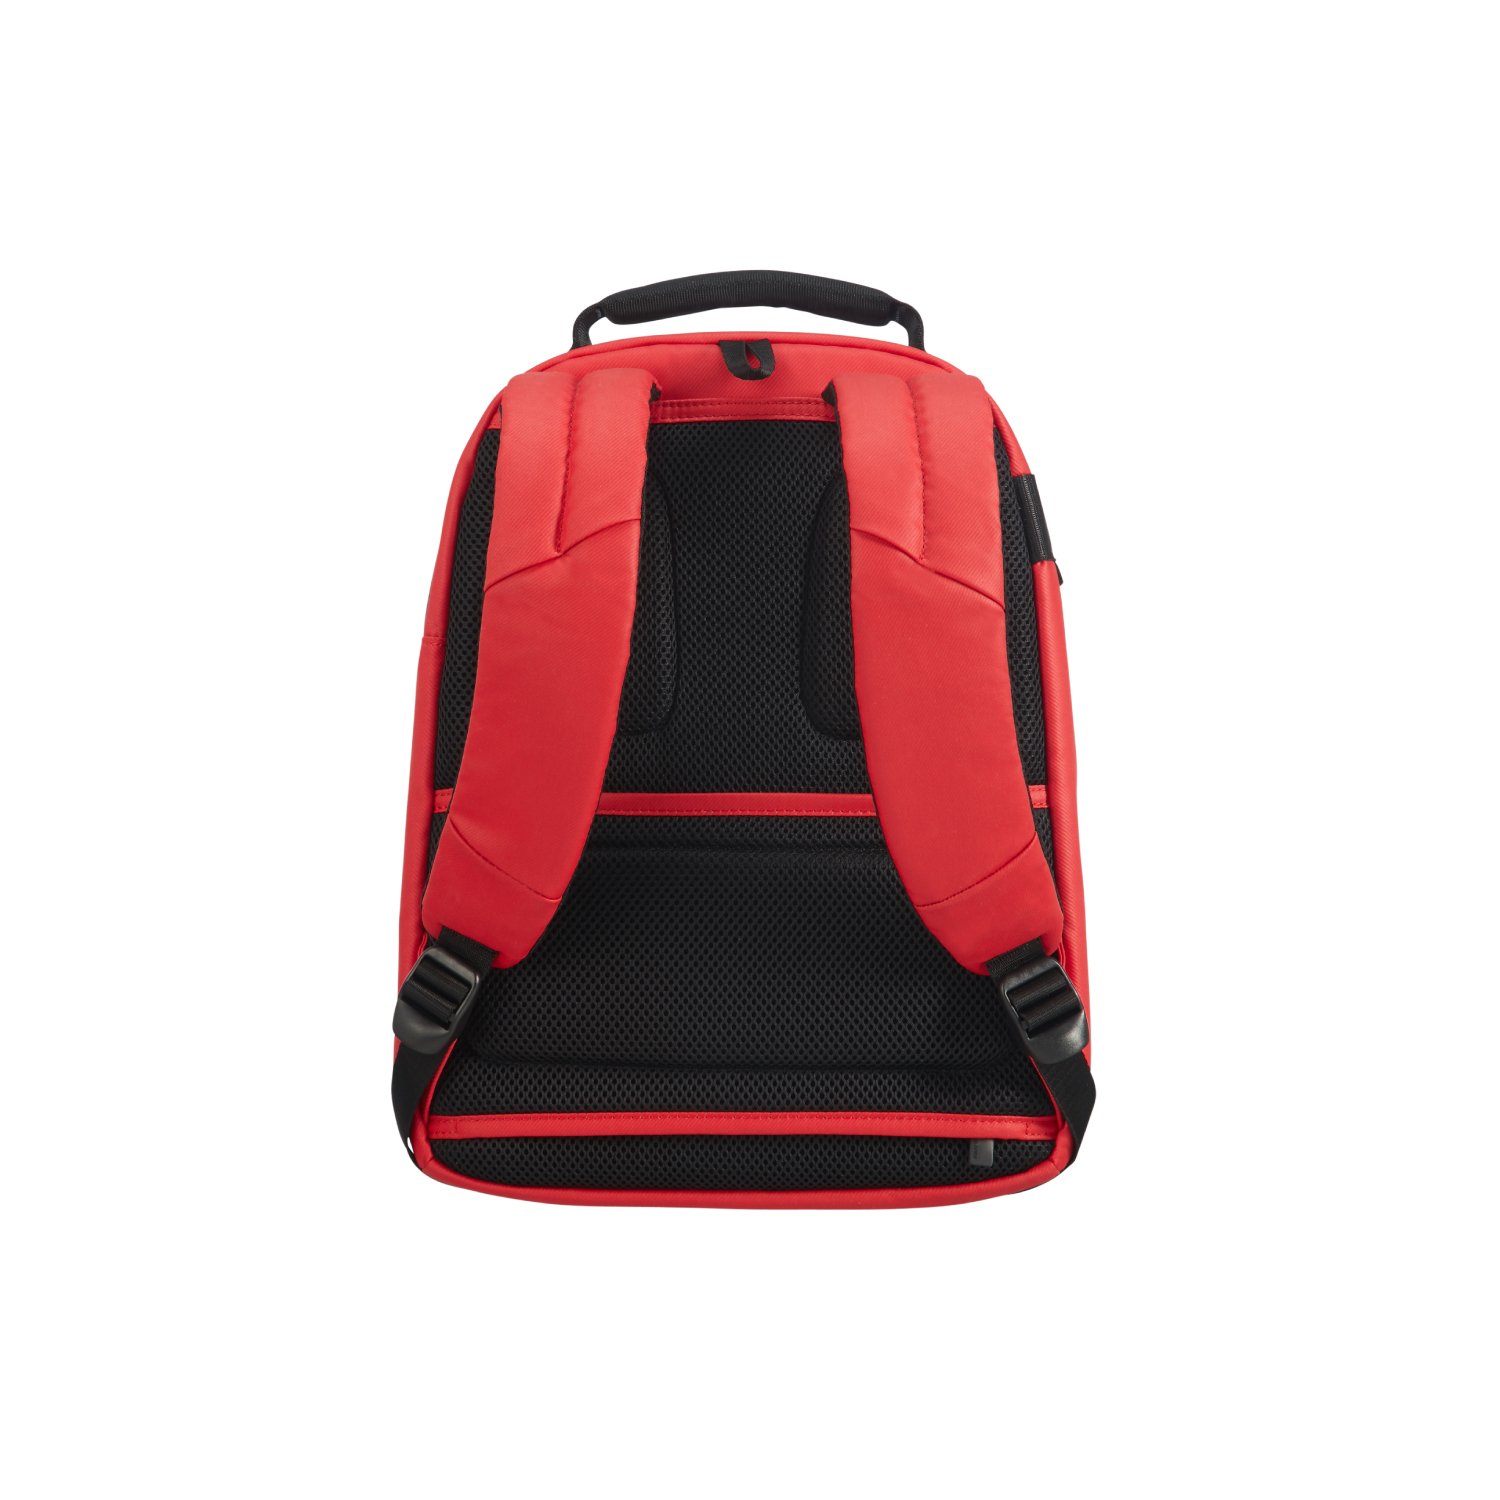 CITYVIBE 2.0-SMALL CITY BACKPACK SCM7-008-SF000*00